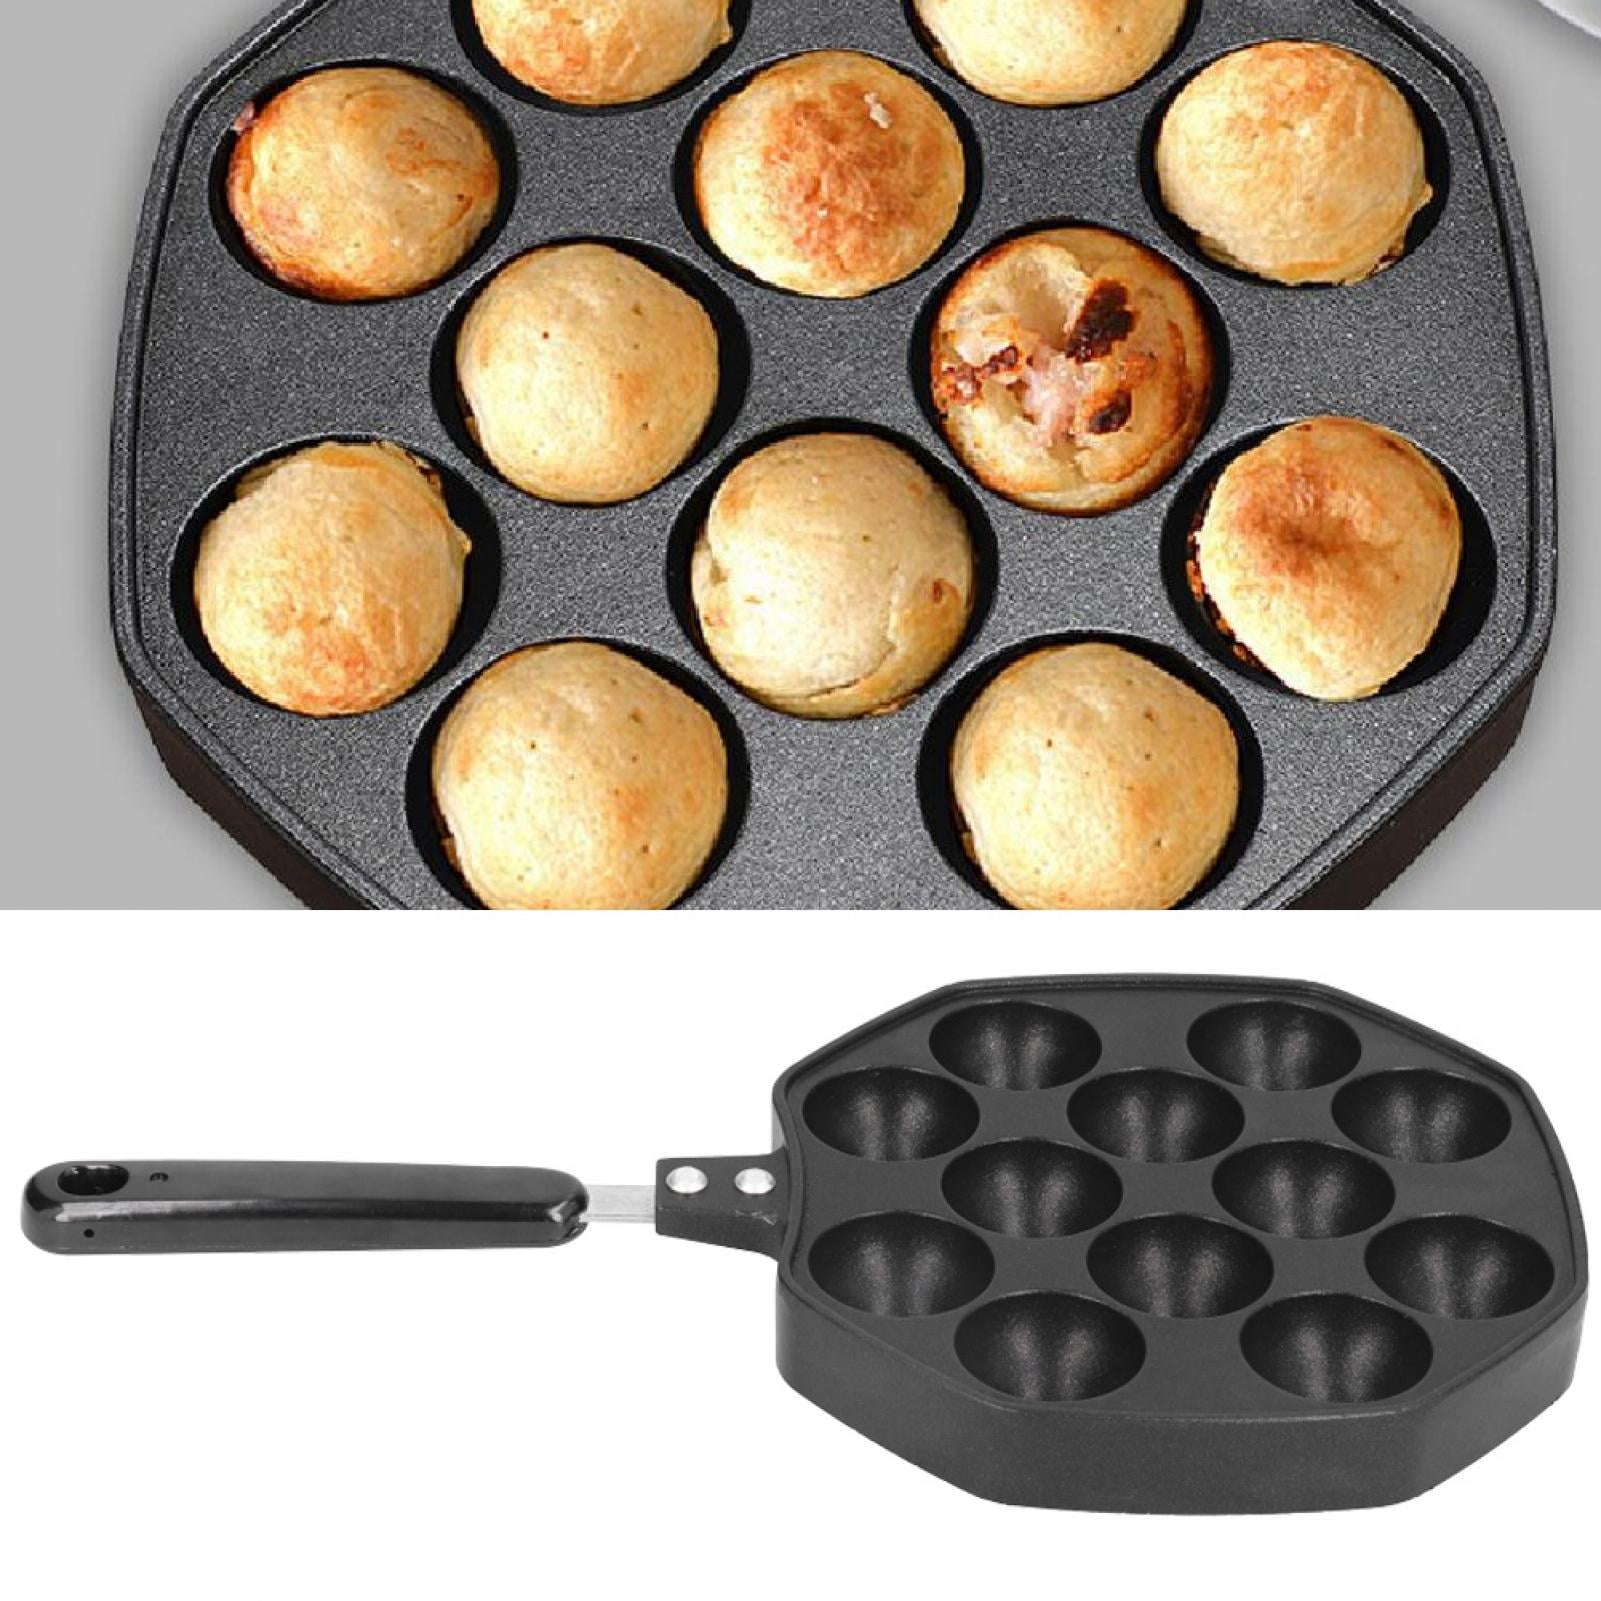 Loaf Baking Mould French-Bread Hamburger Molds Muffin Pan Kitchen Baking Tools 8 Holes Mini Loaf Tin with Loose Bases Baking Tray Mould French Bread Pan Non Stick for Baking 